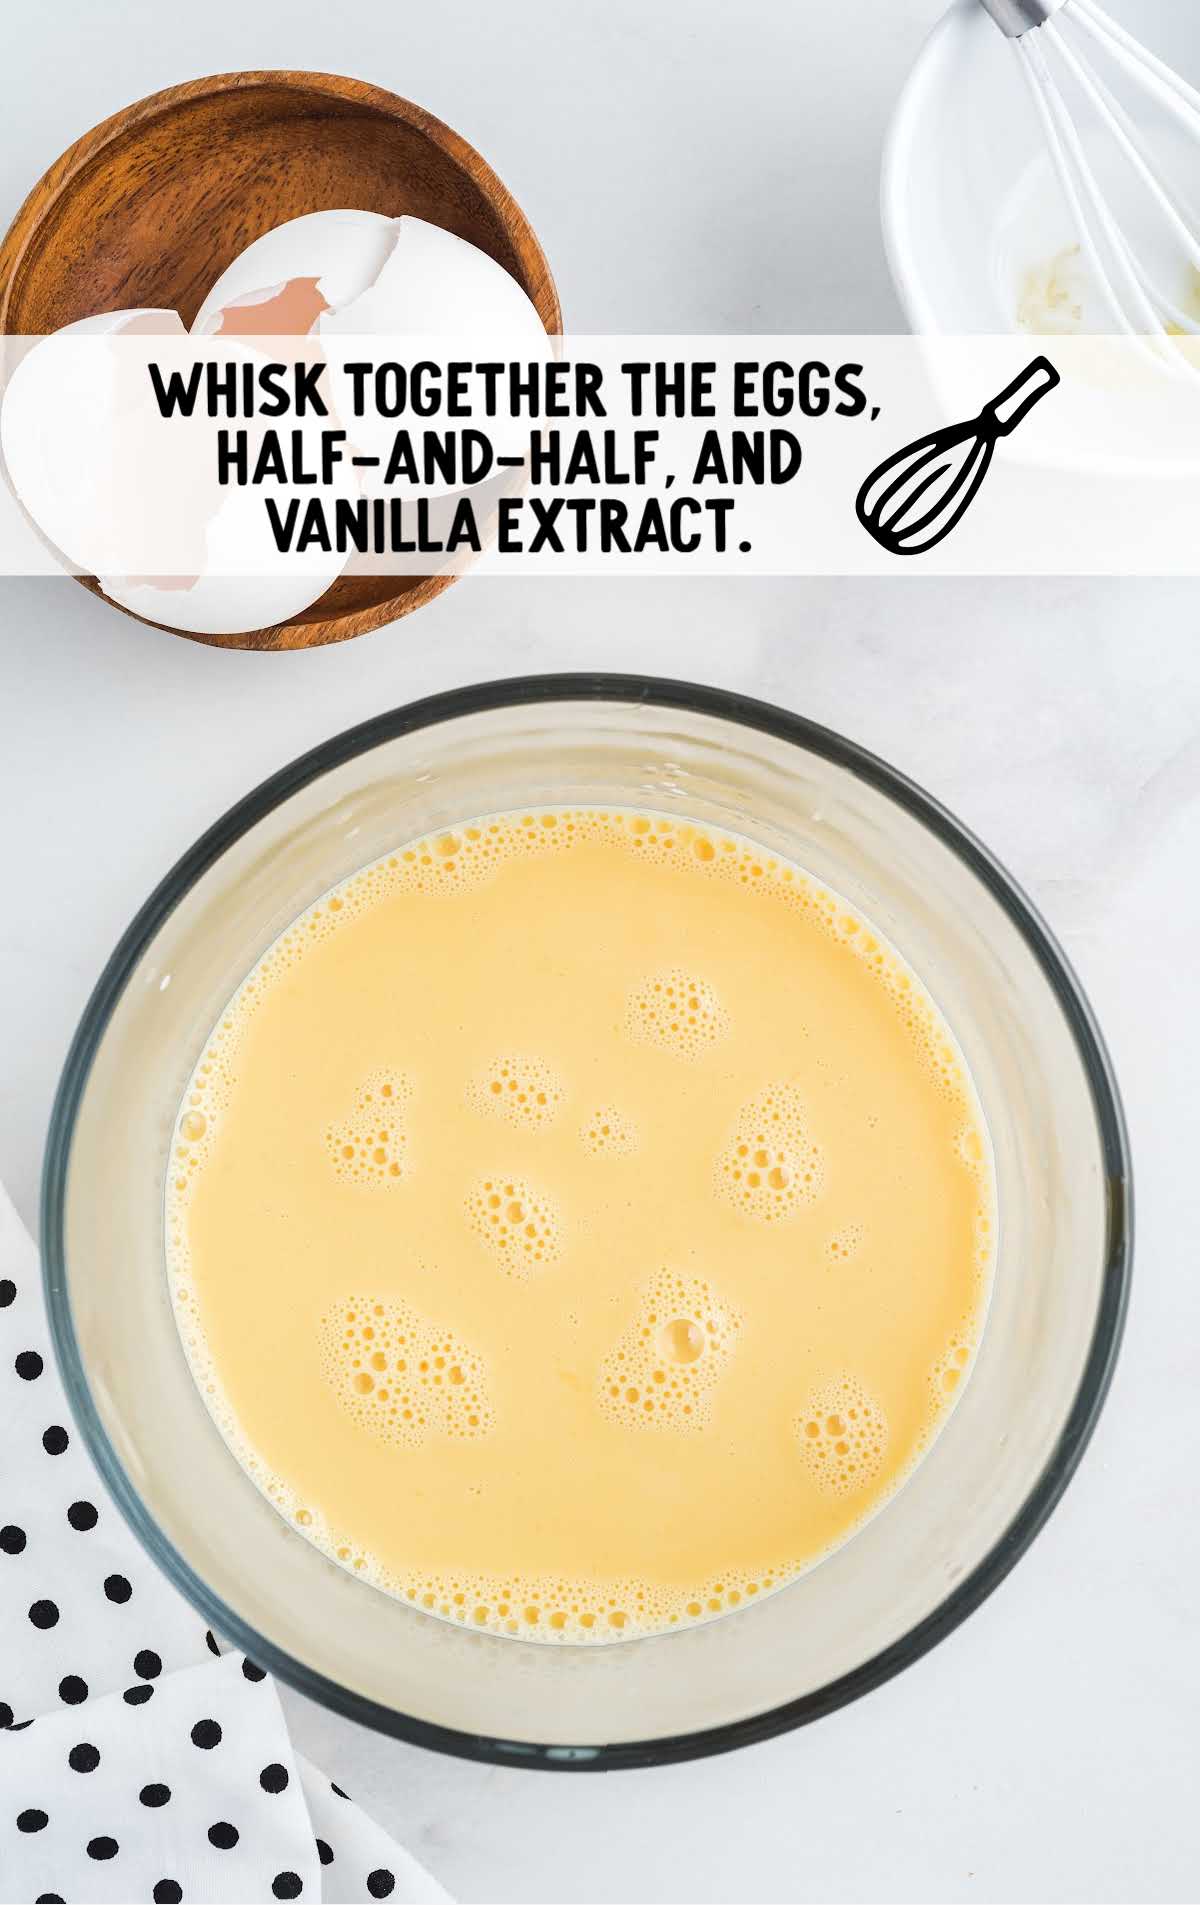 eggs, half and half and vanilla extract whisked together